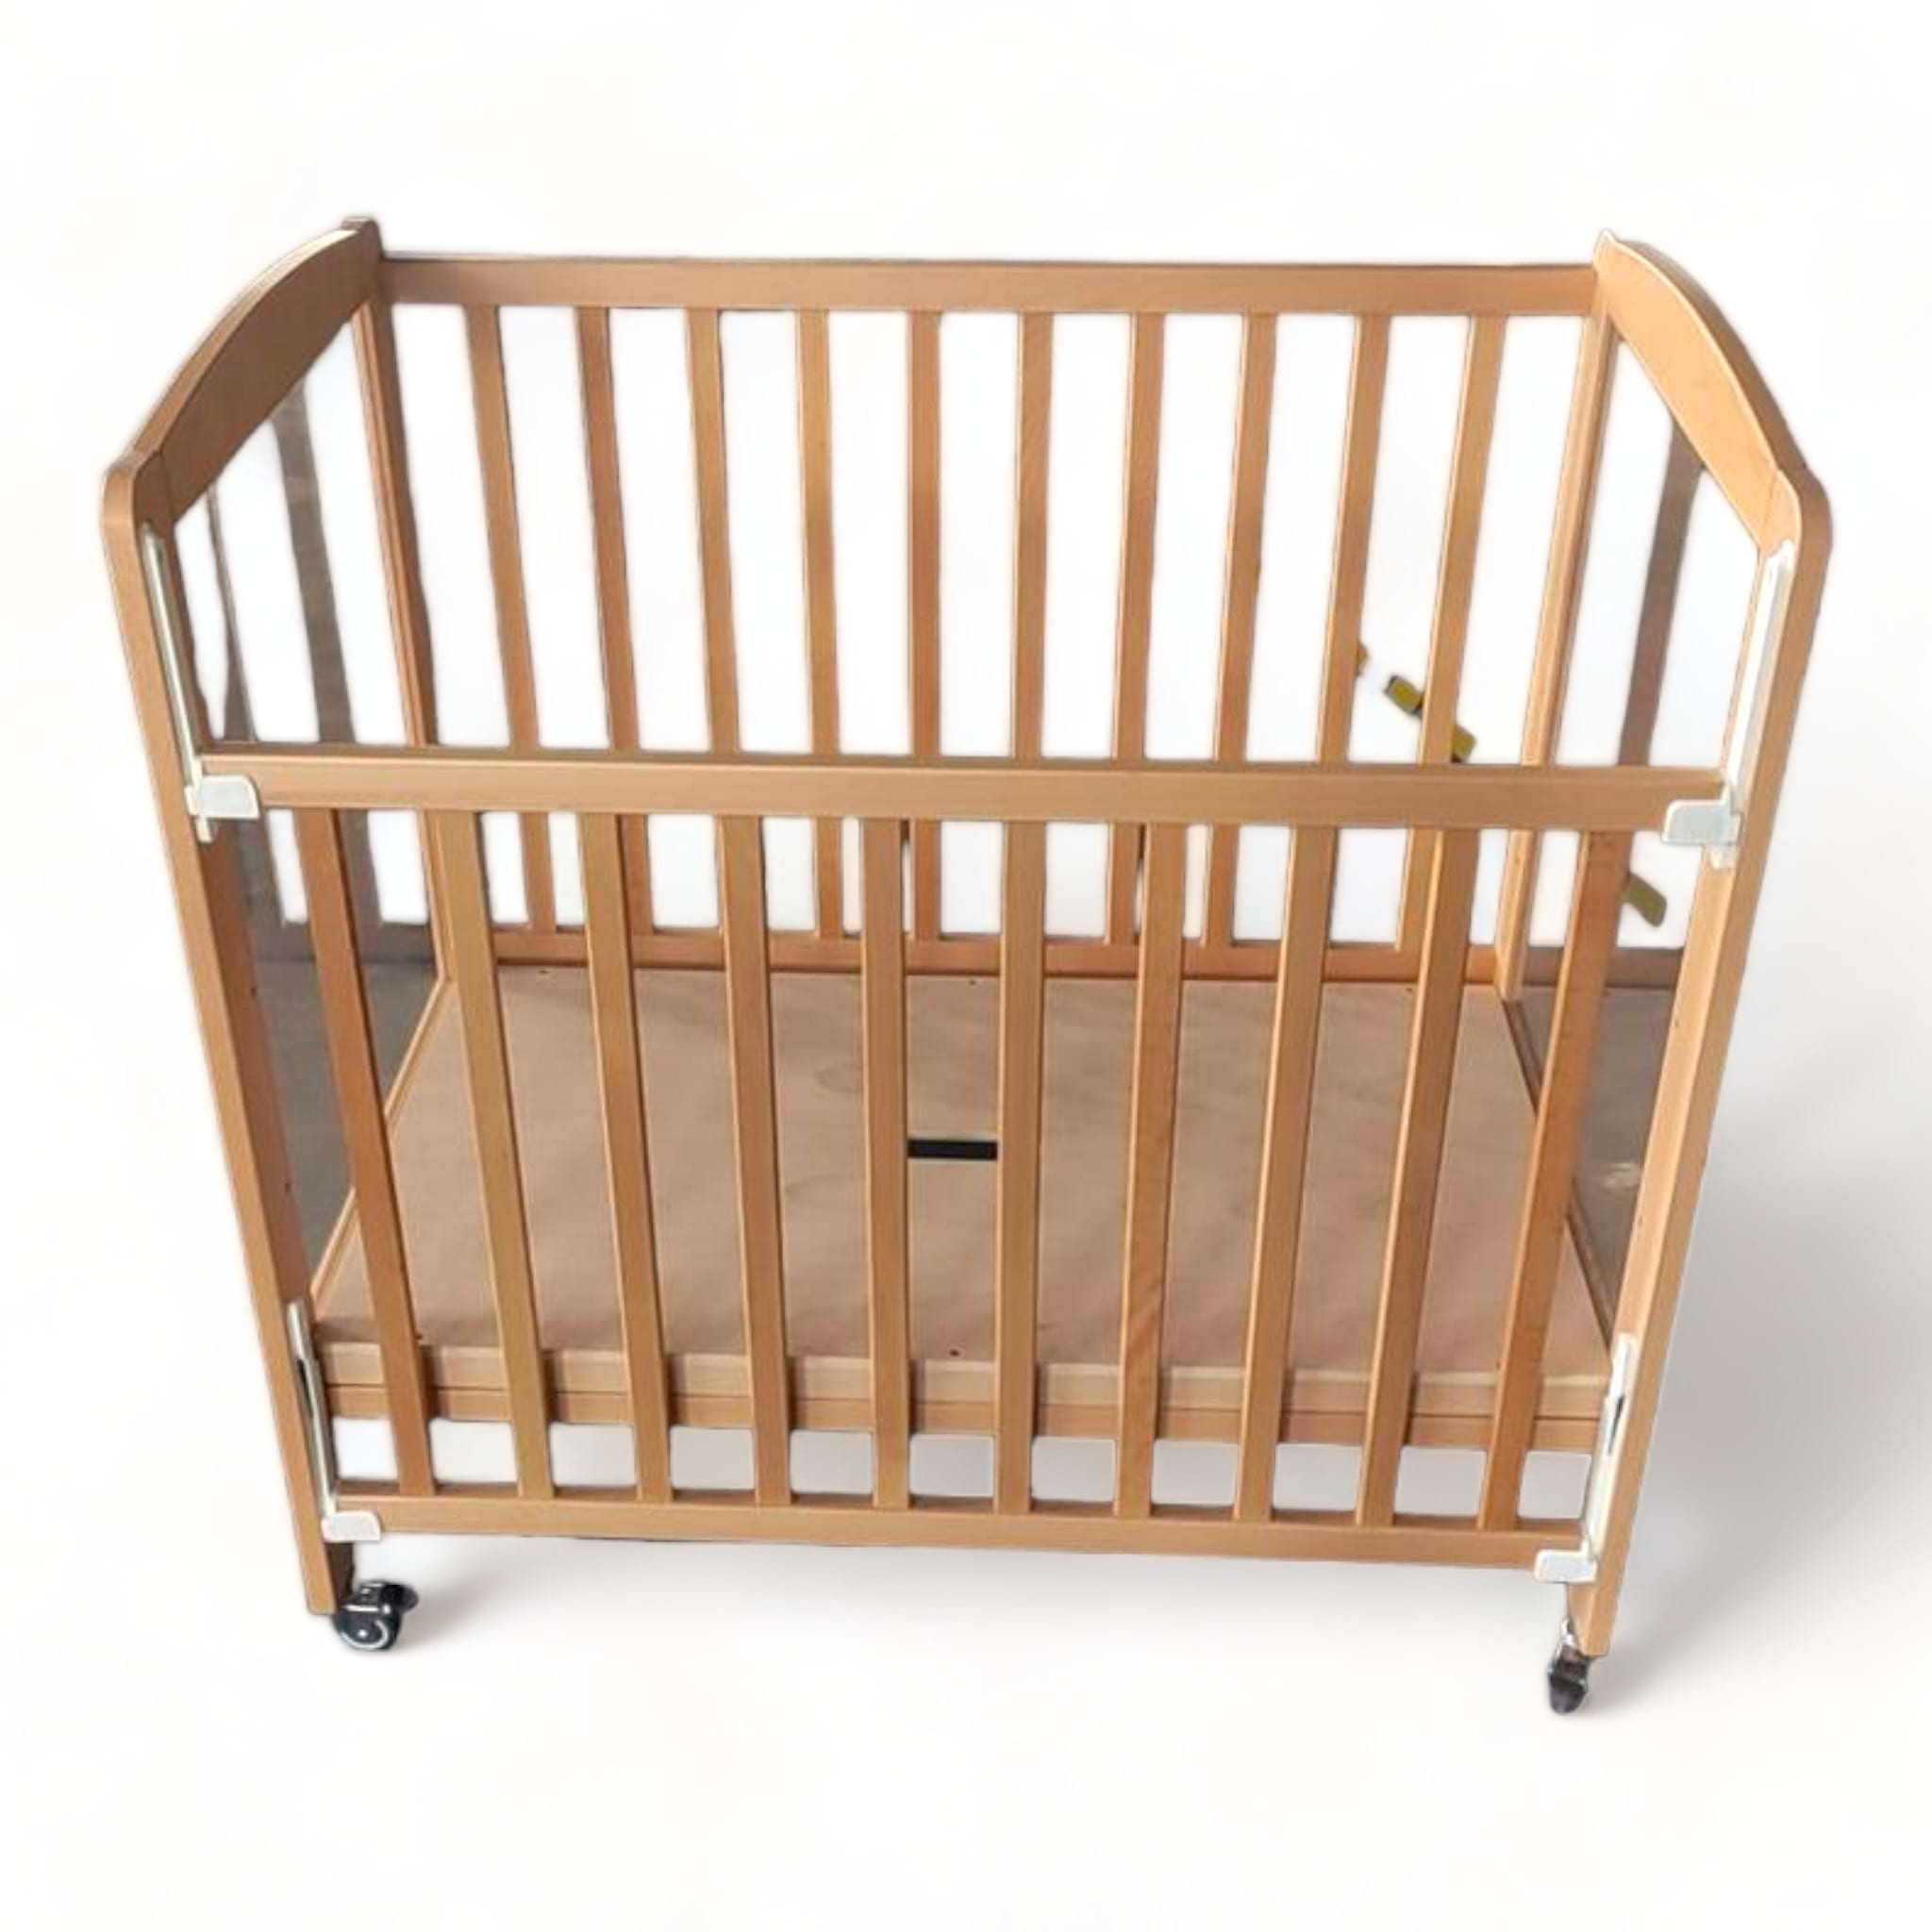 Cot with Clear sides